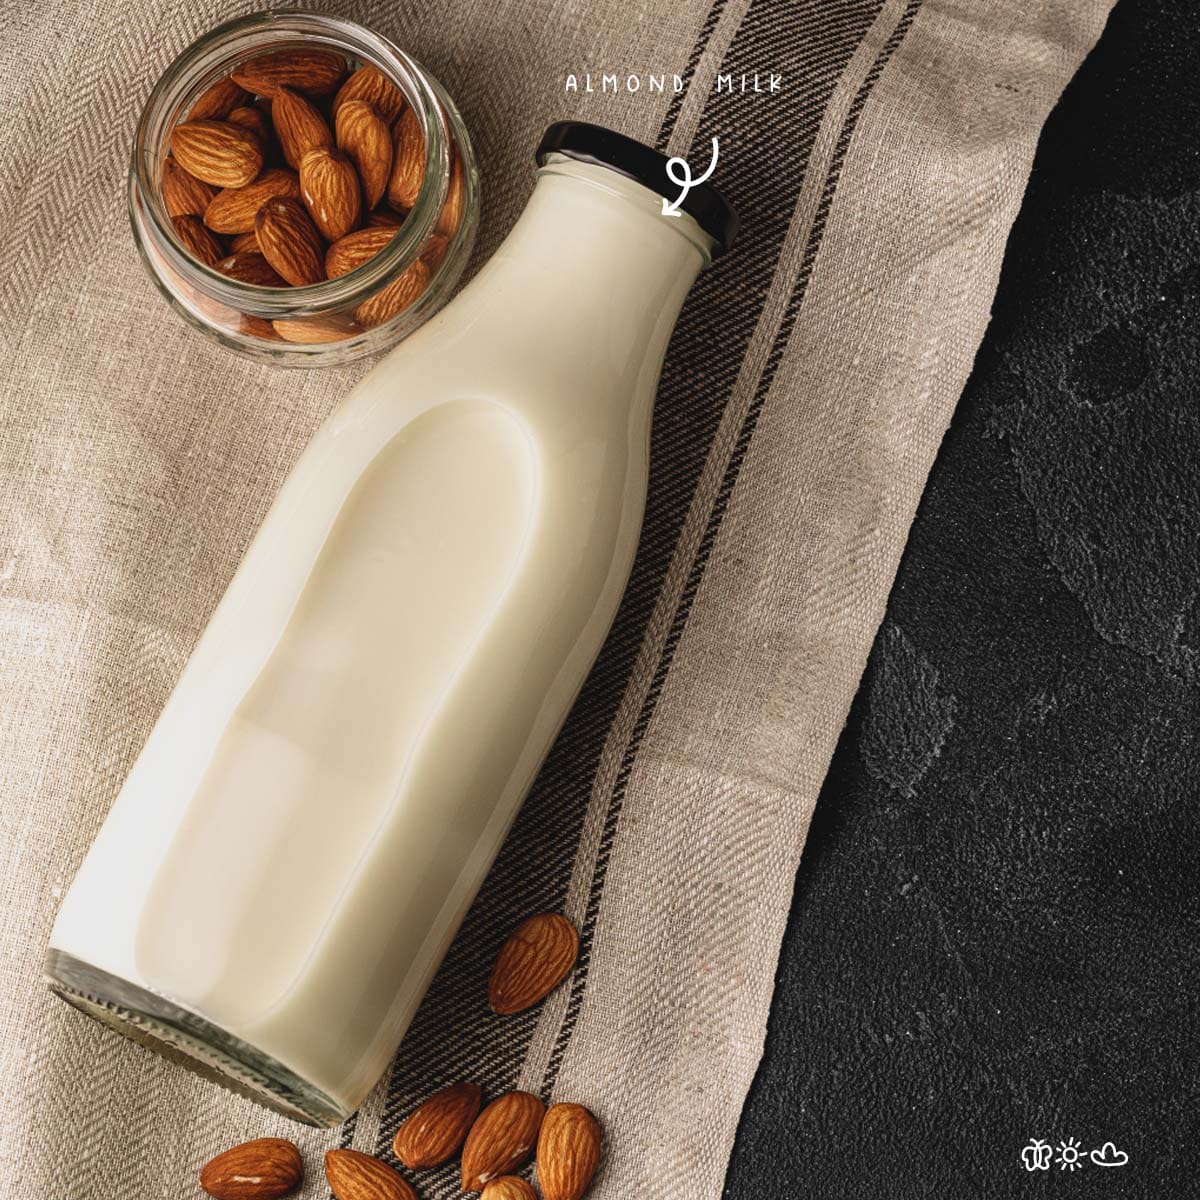 There's something about a warm cup of almond milk that just feels so comforting. But, is it possible to warm up almond milk without it turning into a grainy mess? The answer is yes - and we're going to show you how!